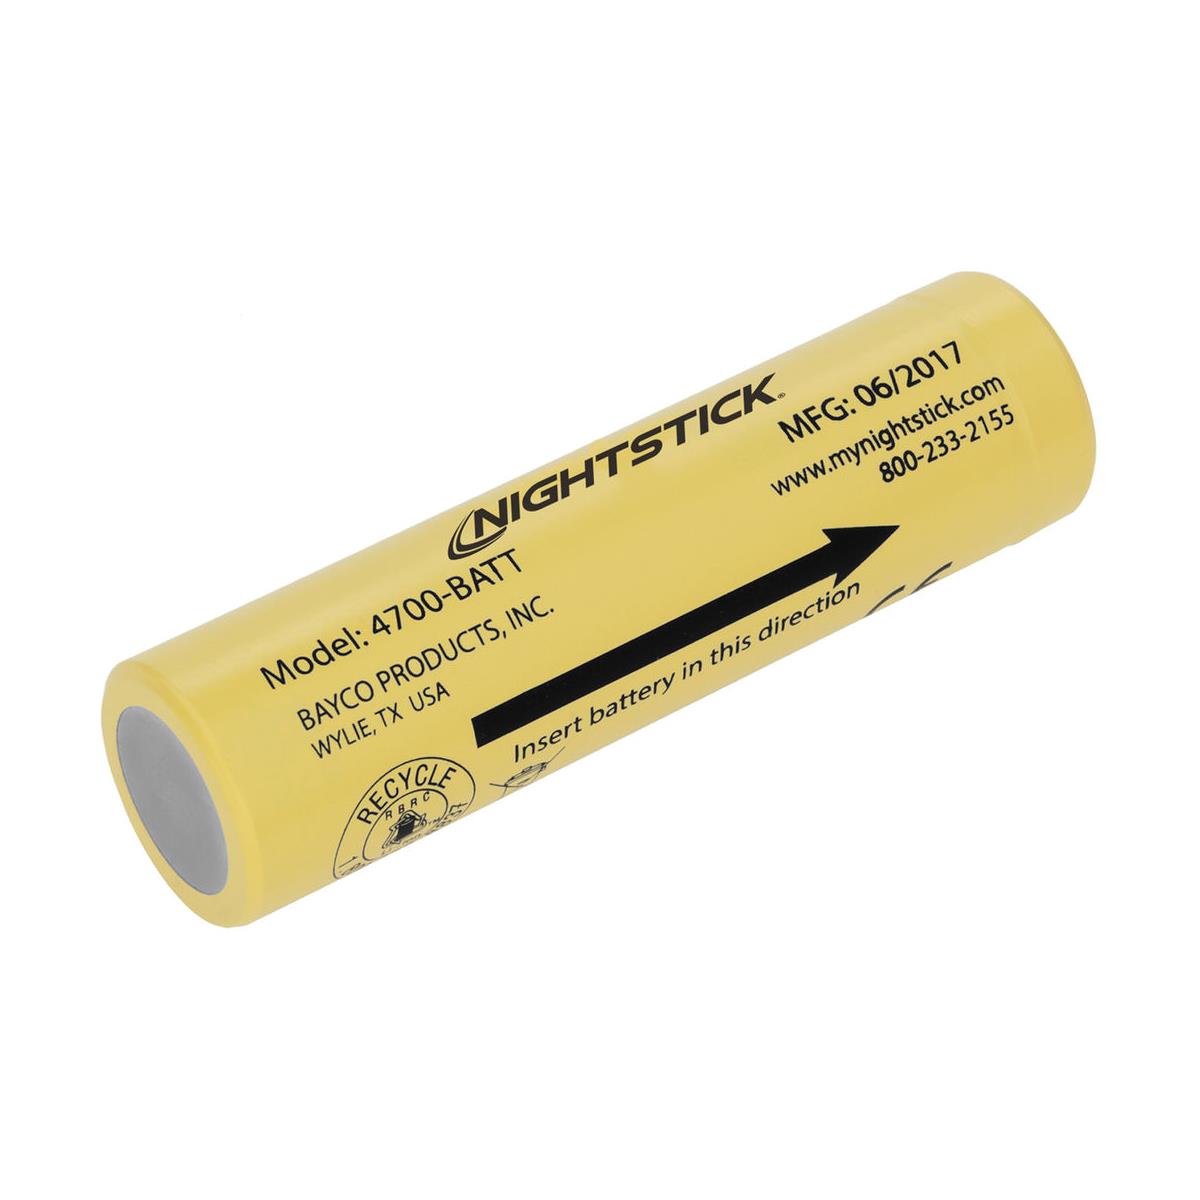 

Nightstick 3.6V 3400mA Rechargeable Lithium-Ion Battery, Yellow